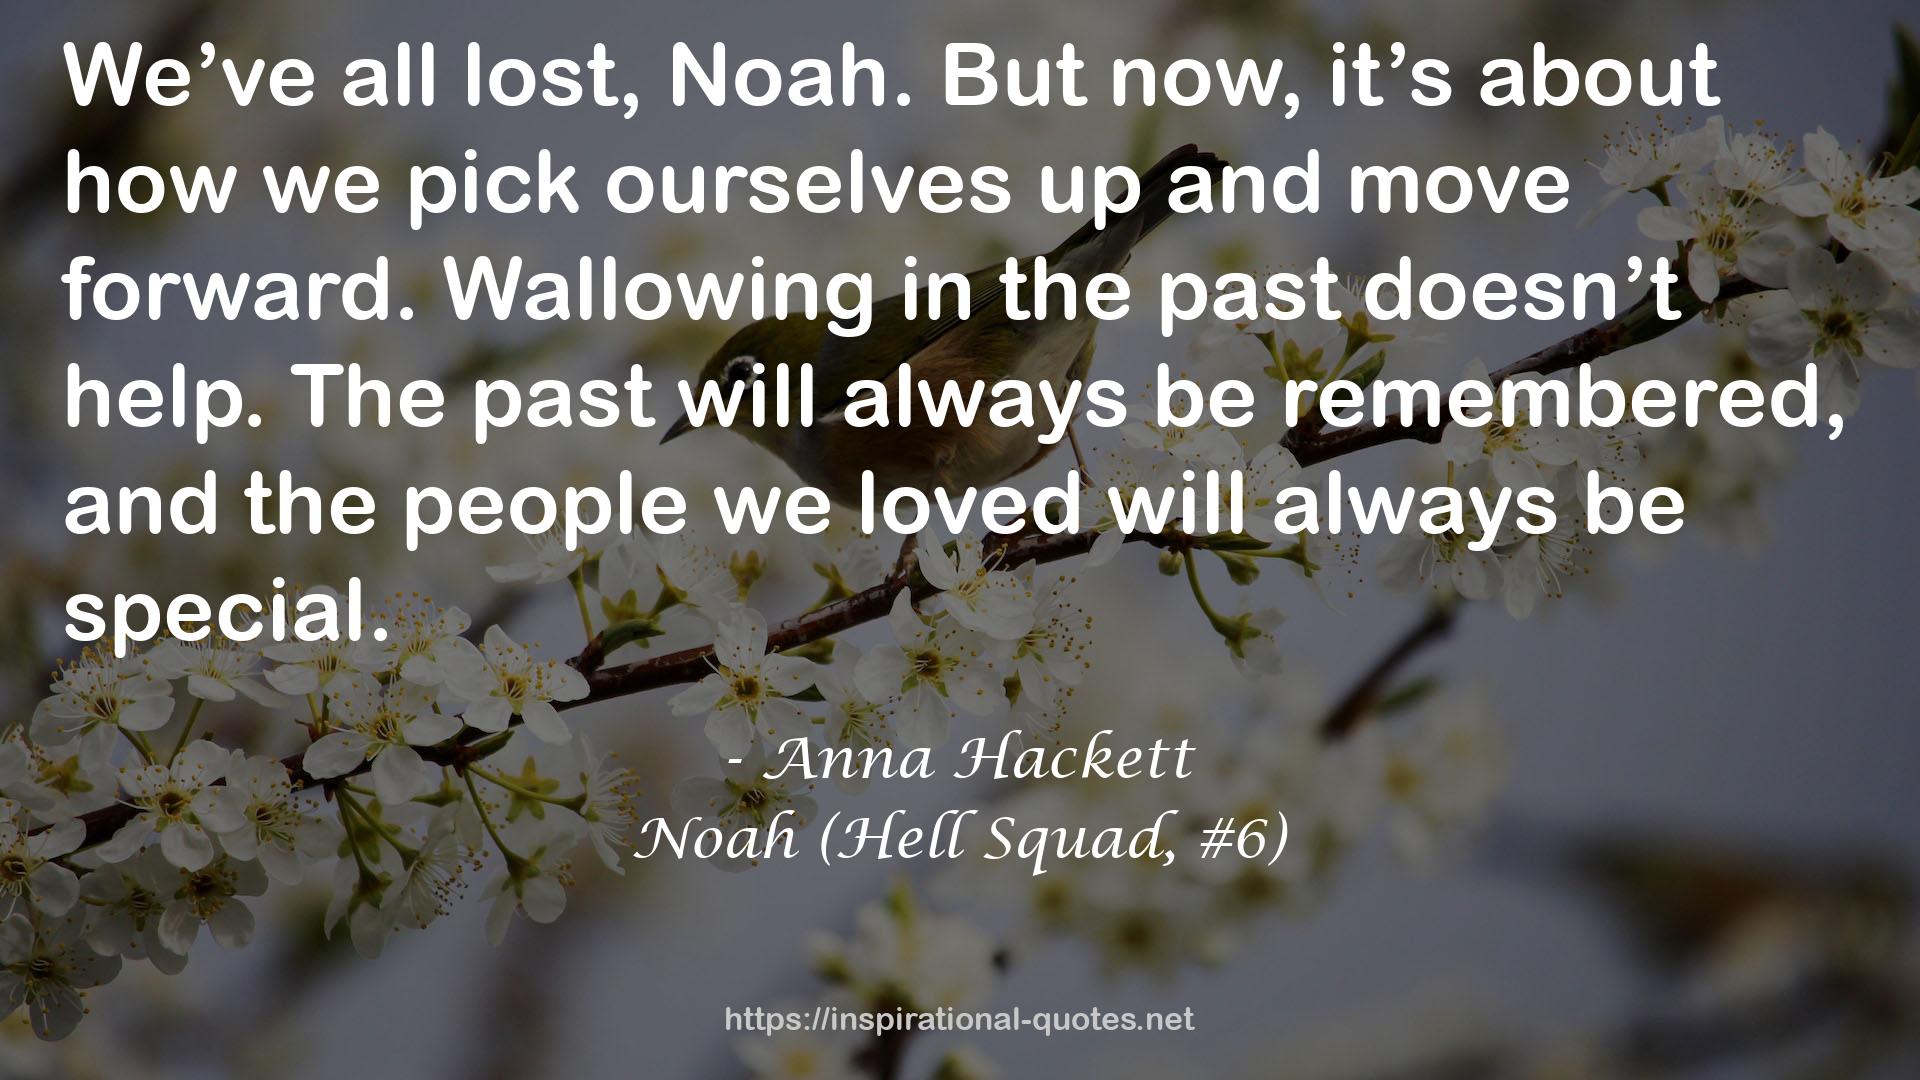 Noah (Hell Squad, #6) QUOTES